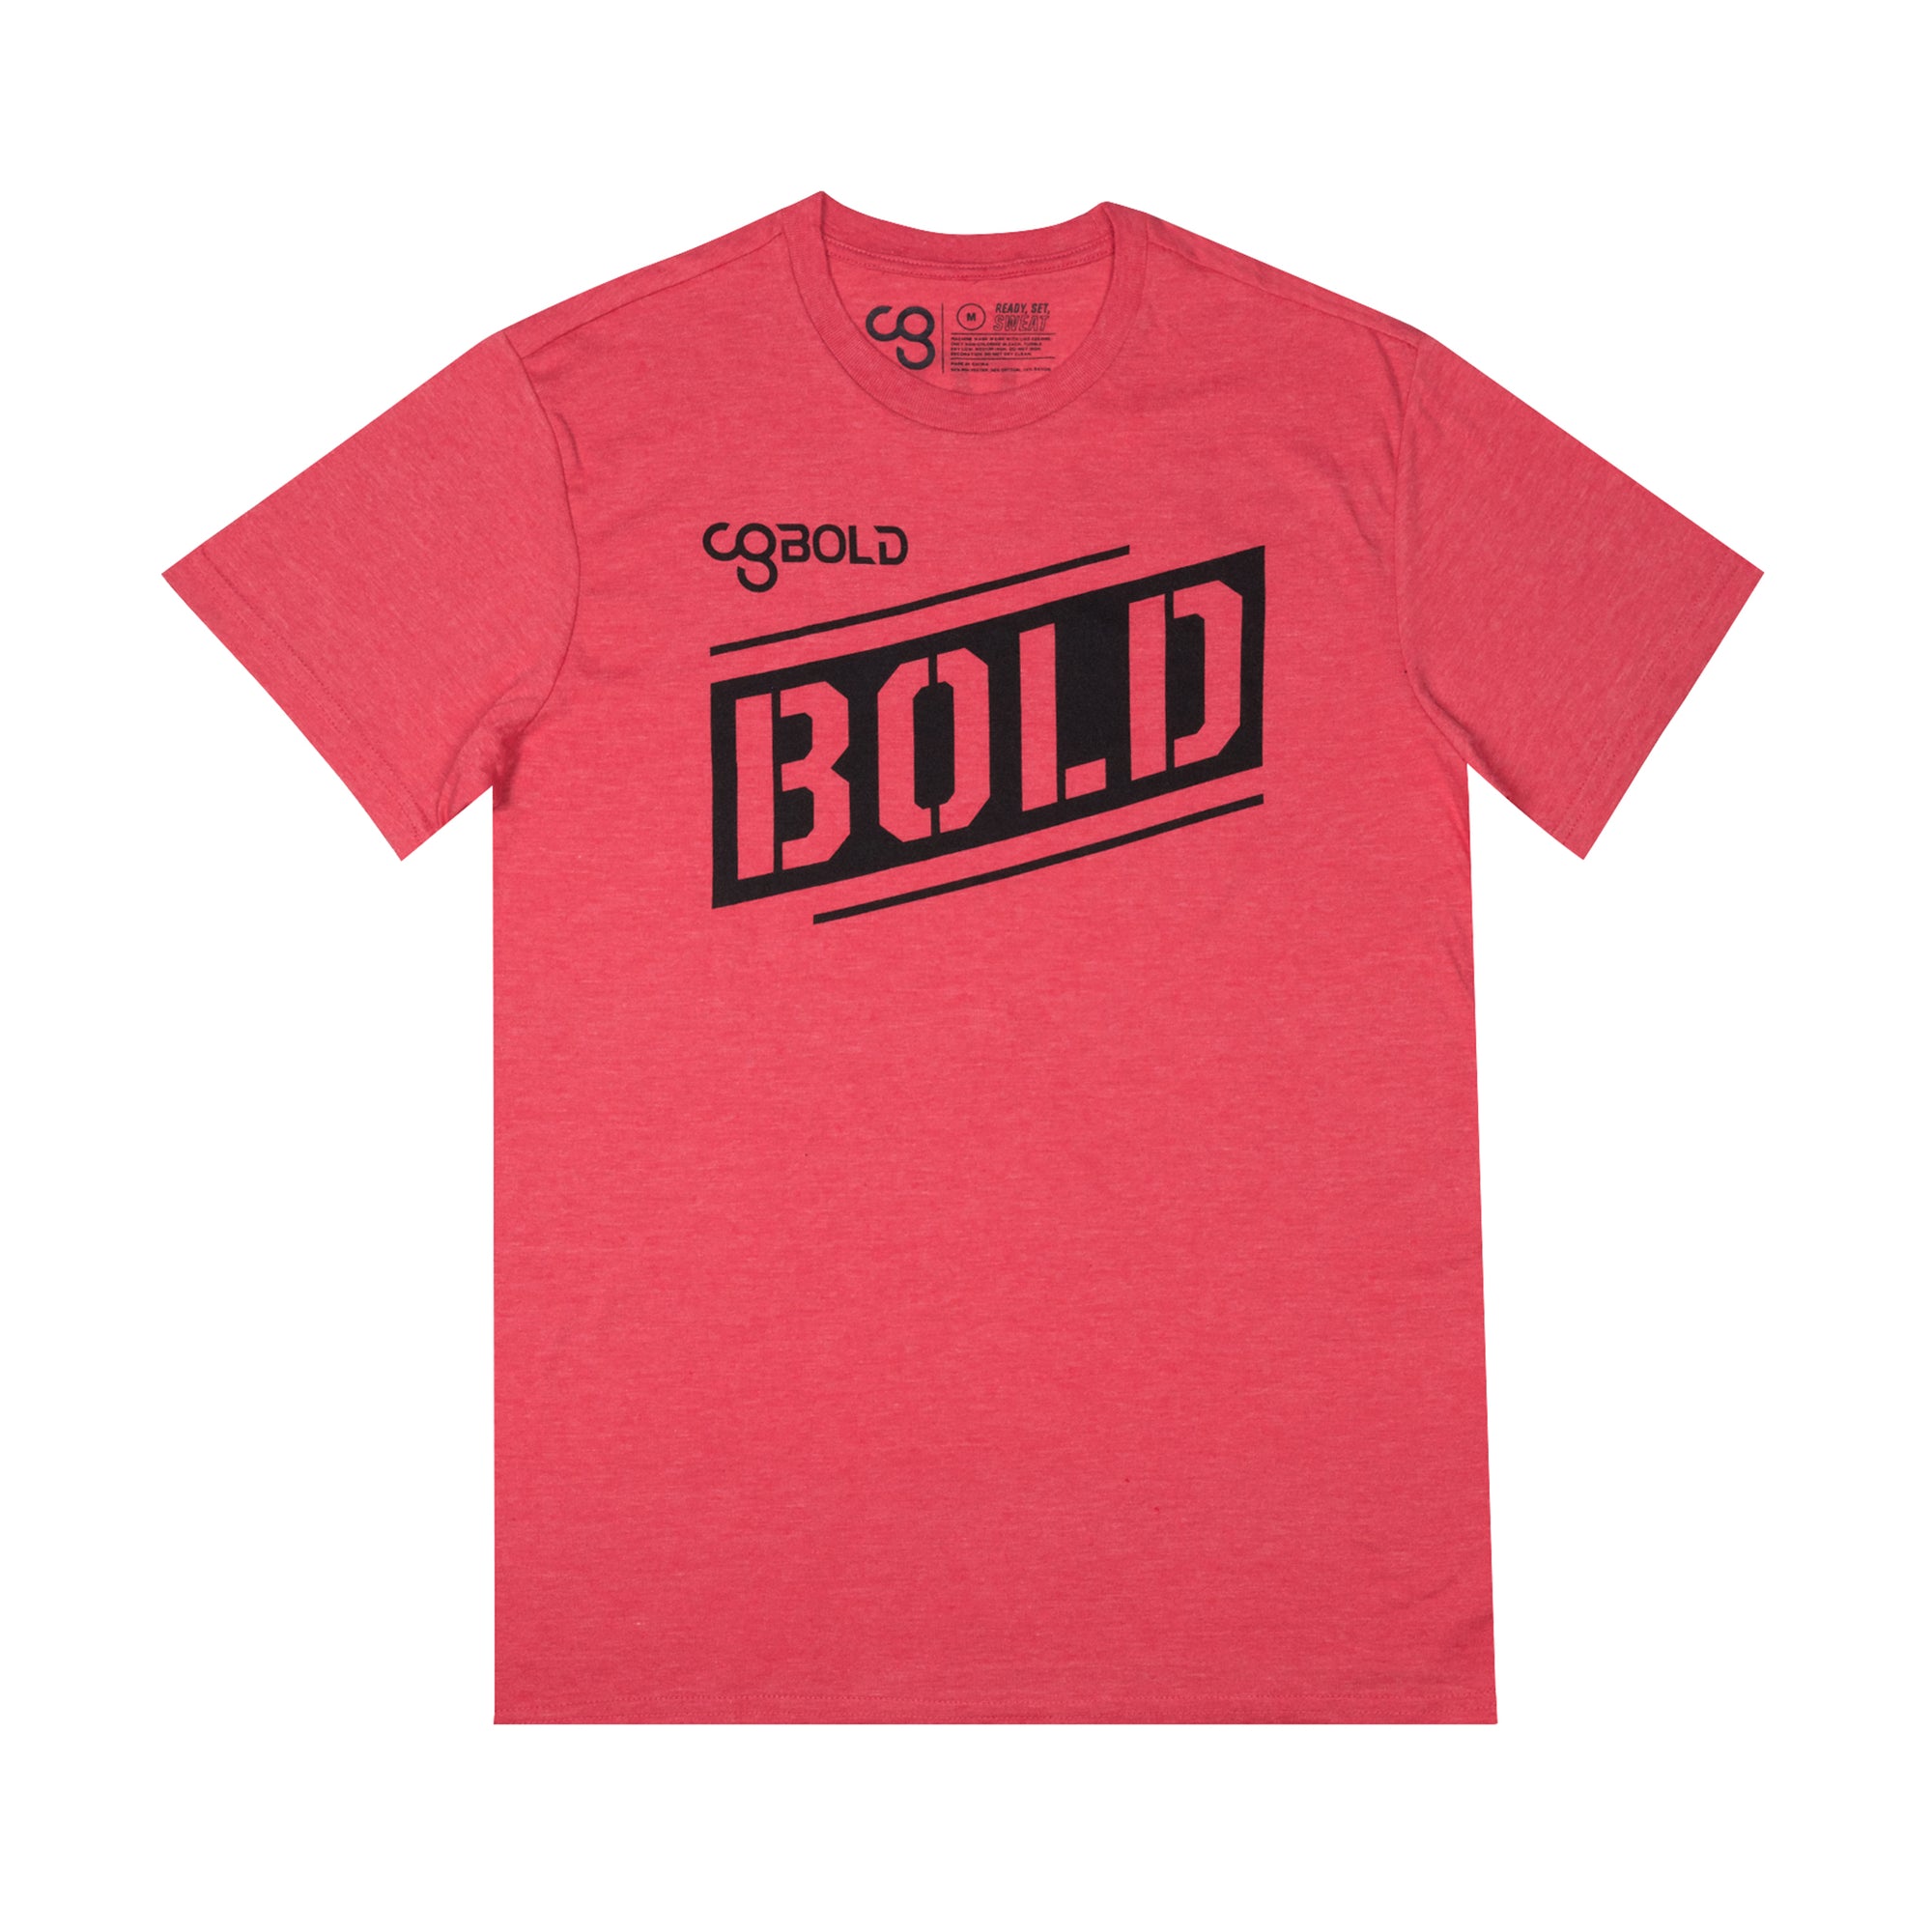 FREE BOLD Tee with $20 Purchase